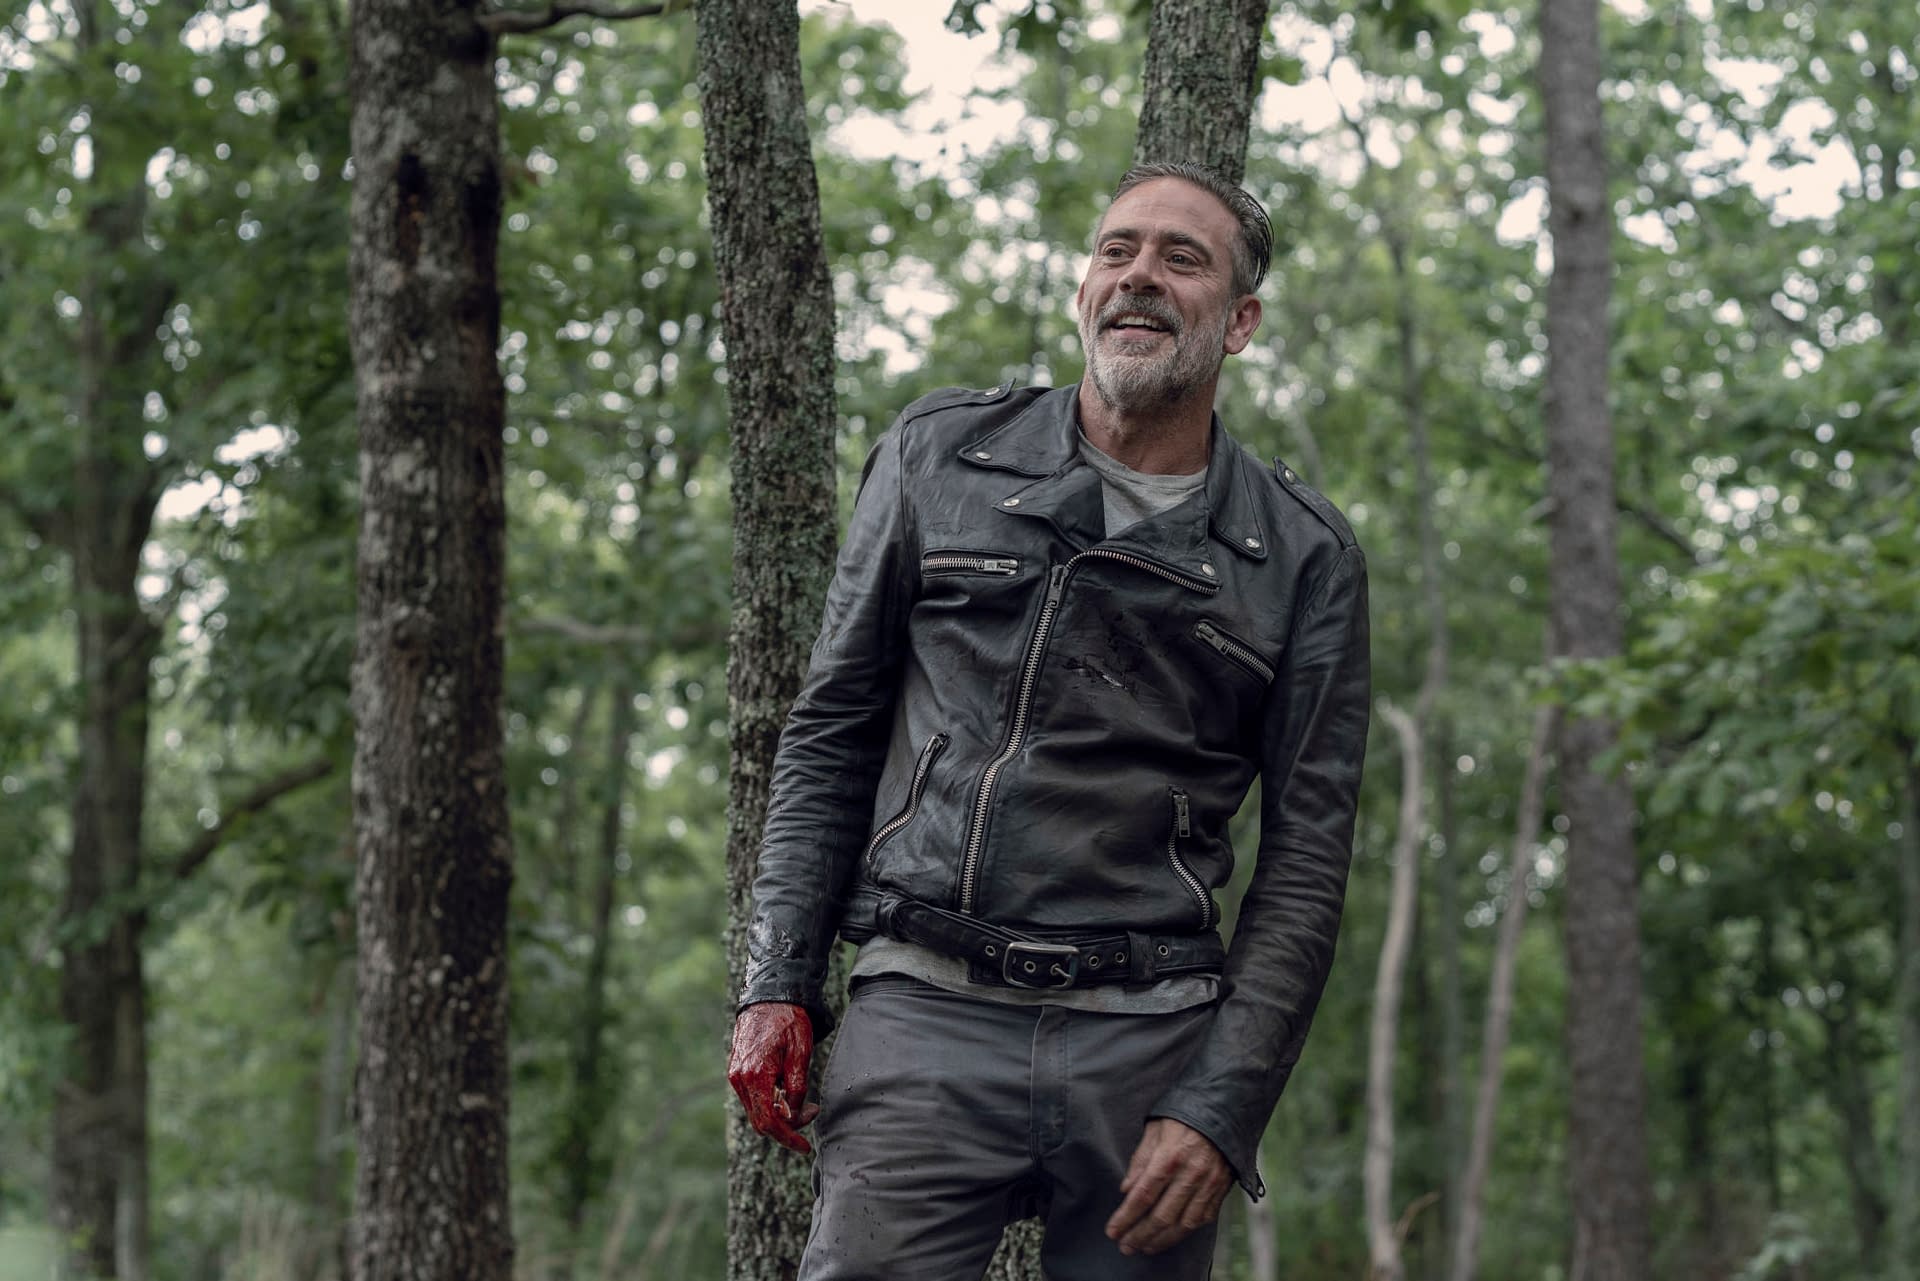 "The Walking Dead" Season 10 Teaser Poses Ominous Question: Who Will Rise &#8211; And Who Will Fall? [VIDEO]